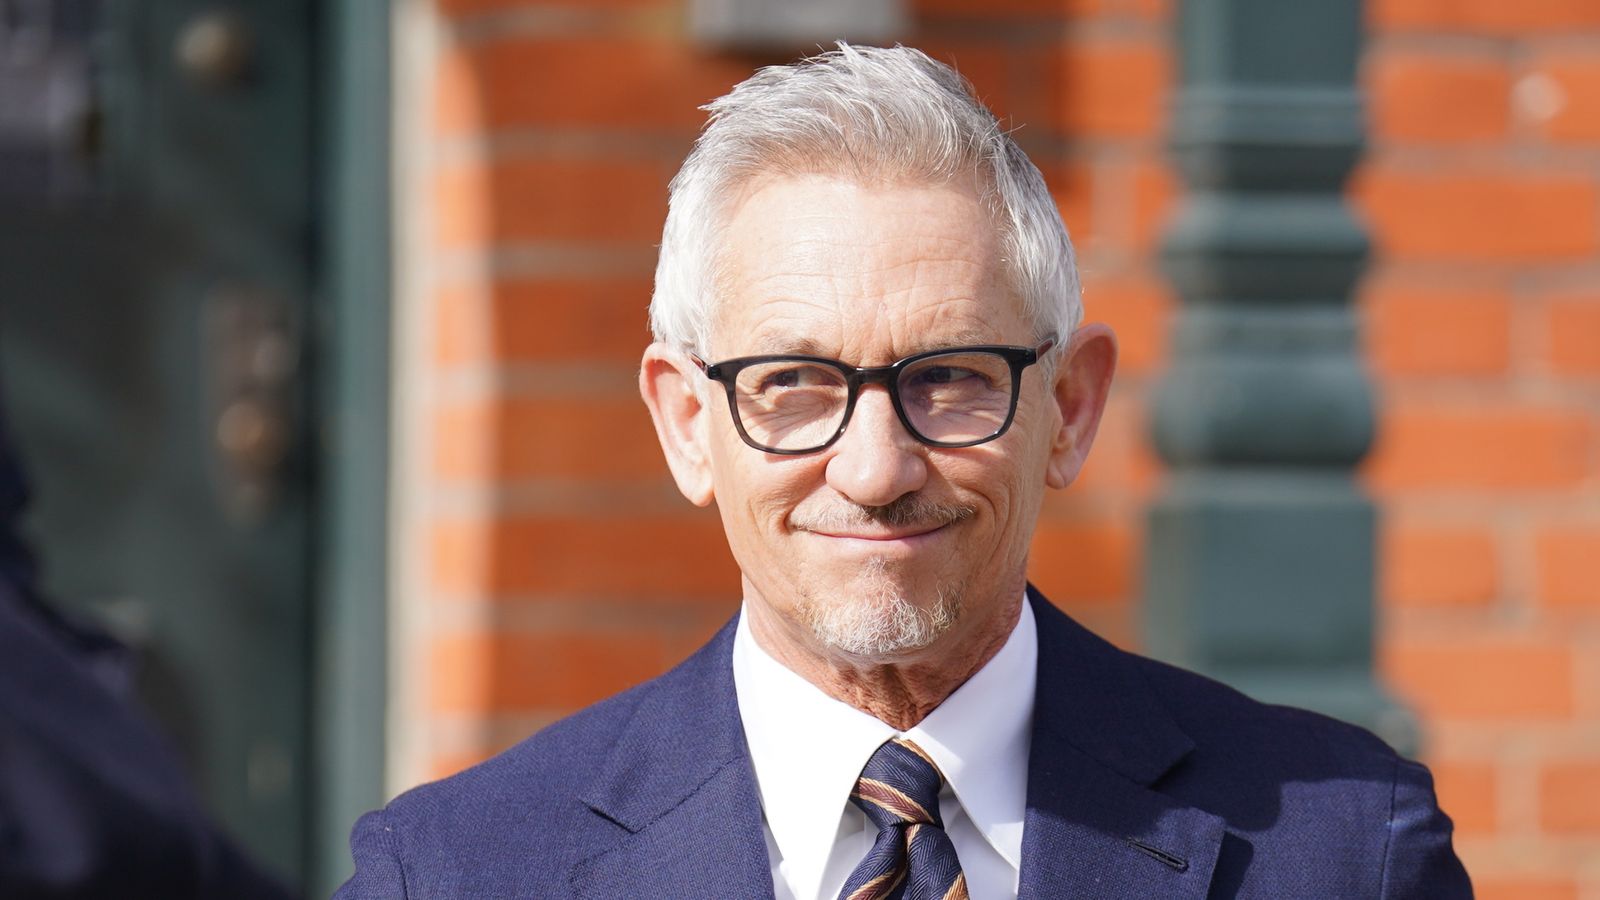 Gary Lineker: Match of the Day presenter to return to hosting BBC Sport after conflict resolved